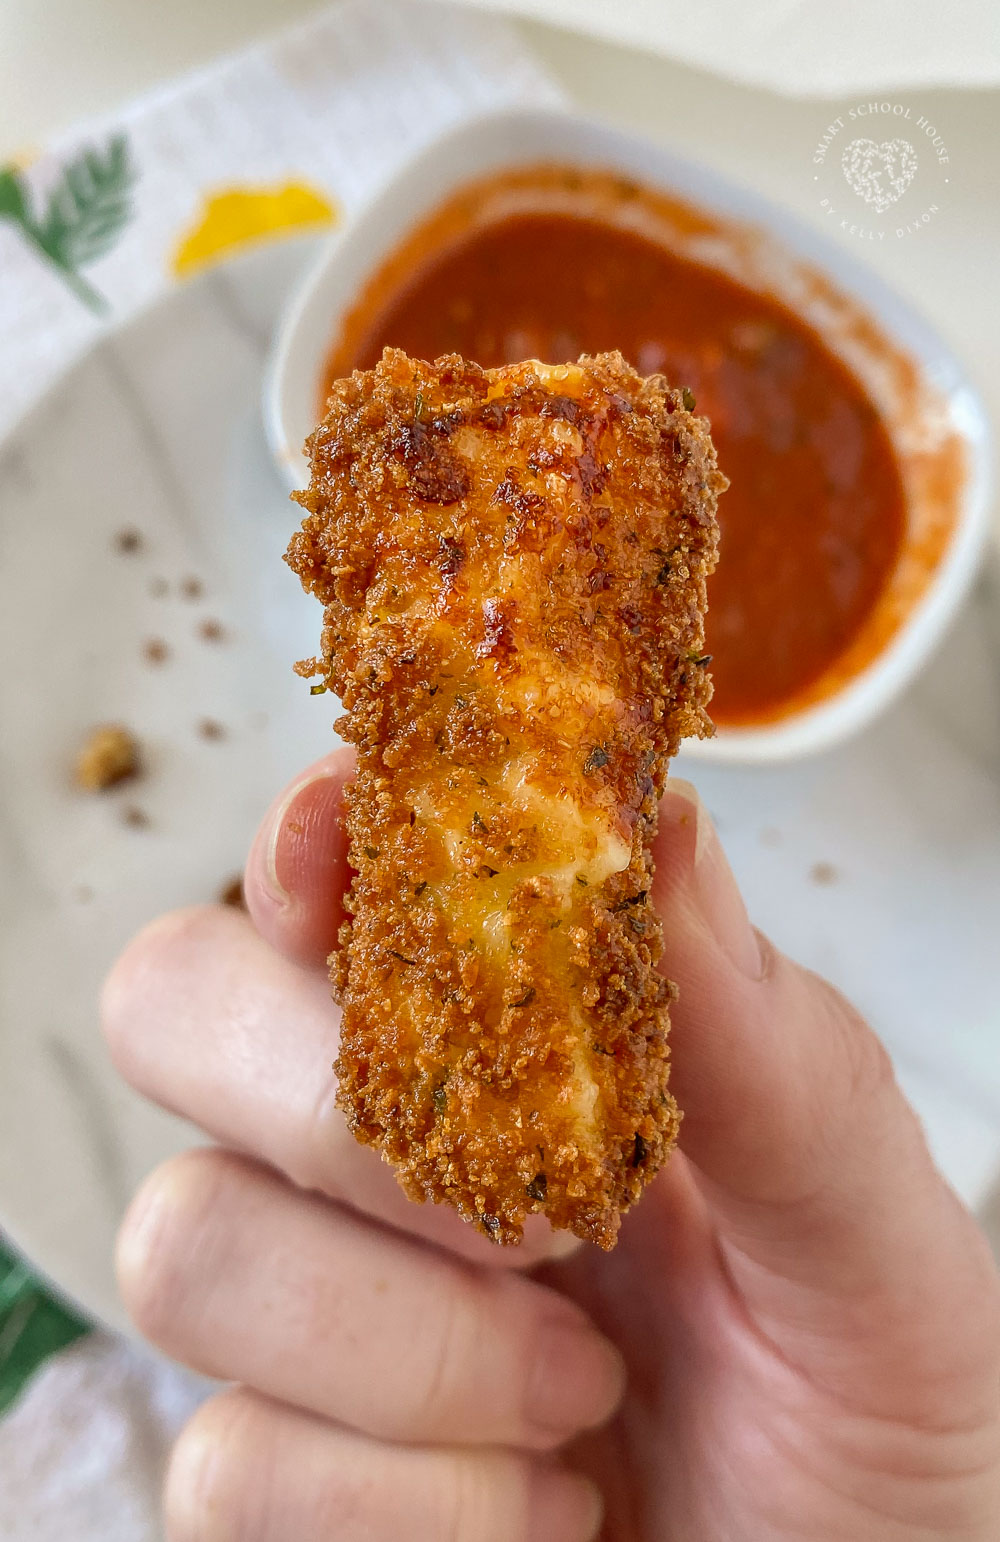 Knowing how to make your own mozzarella sticks is a dangerous thing. At any moment, you could whip up your very own sticks of warm and creamy mozzarella surrounded in perfectly fried Italian batter. Comfort food you say? Yes. And it's very, very dangerous to know how easy they are to make. Here’s how to do it: